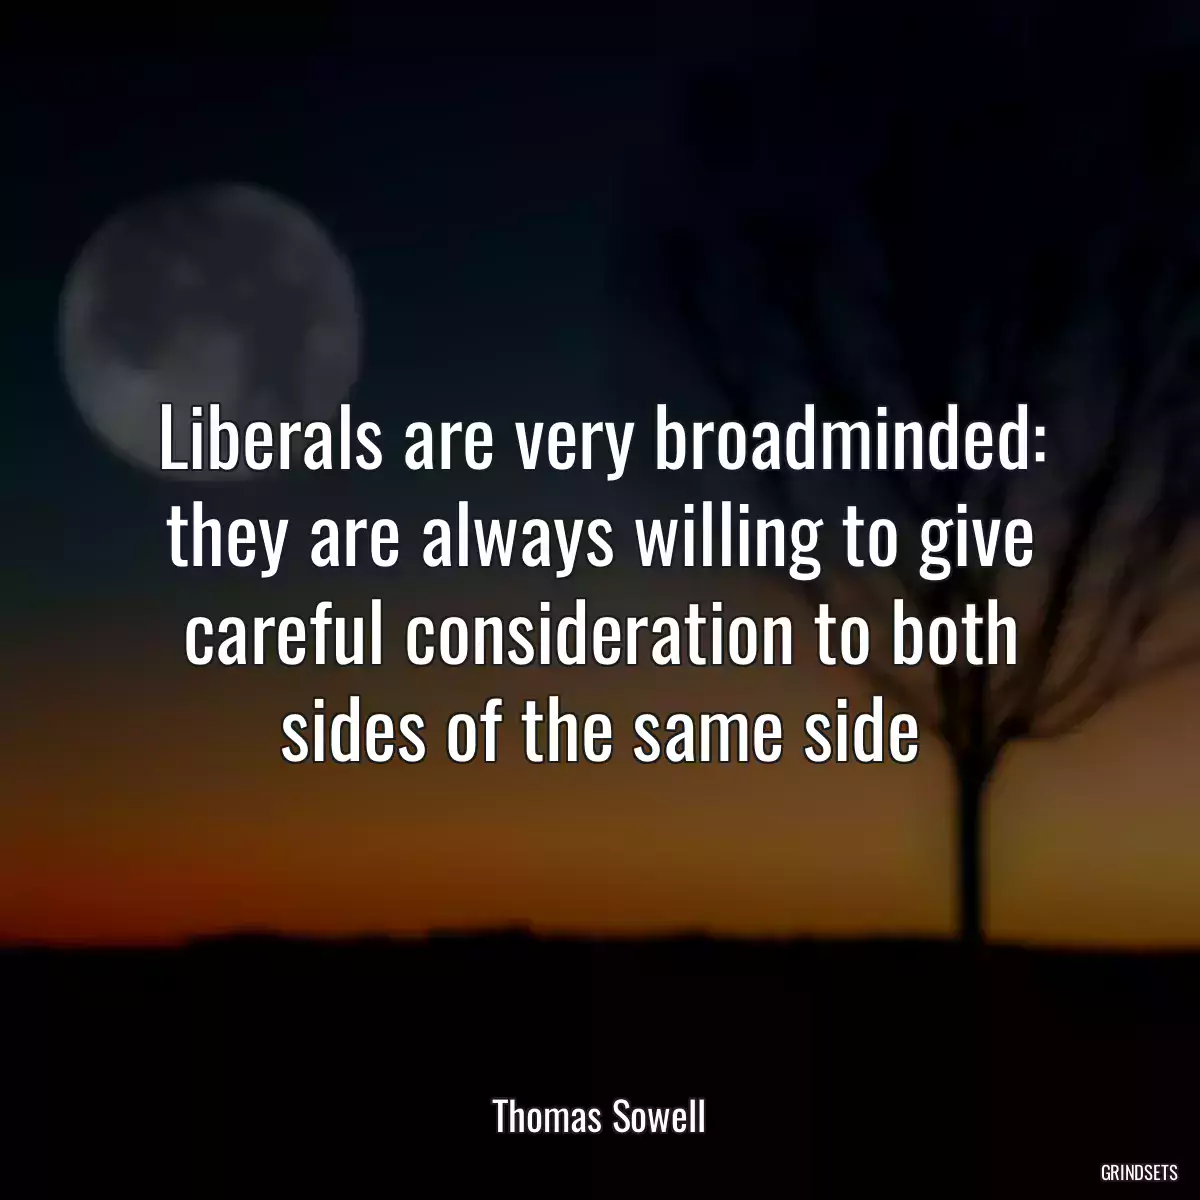 Liberals are very broadminded: they are always willing to give careful consideration to both sides of the same side